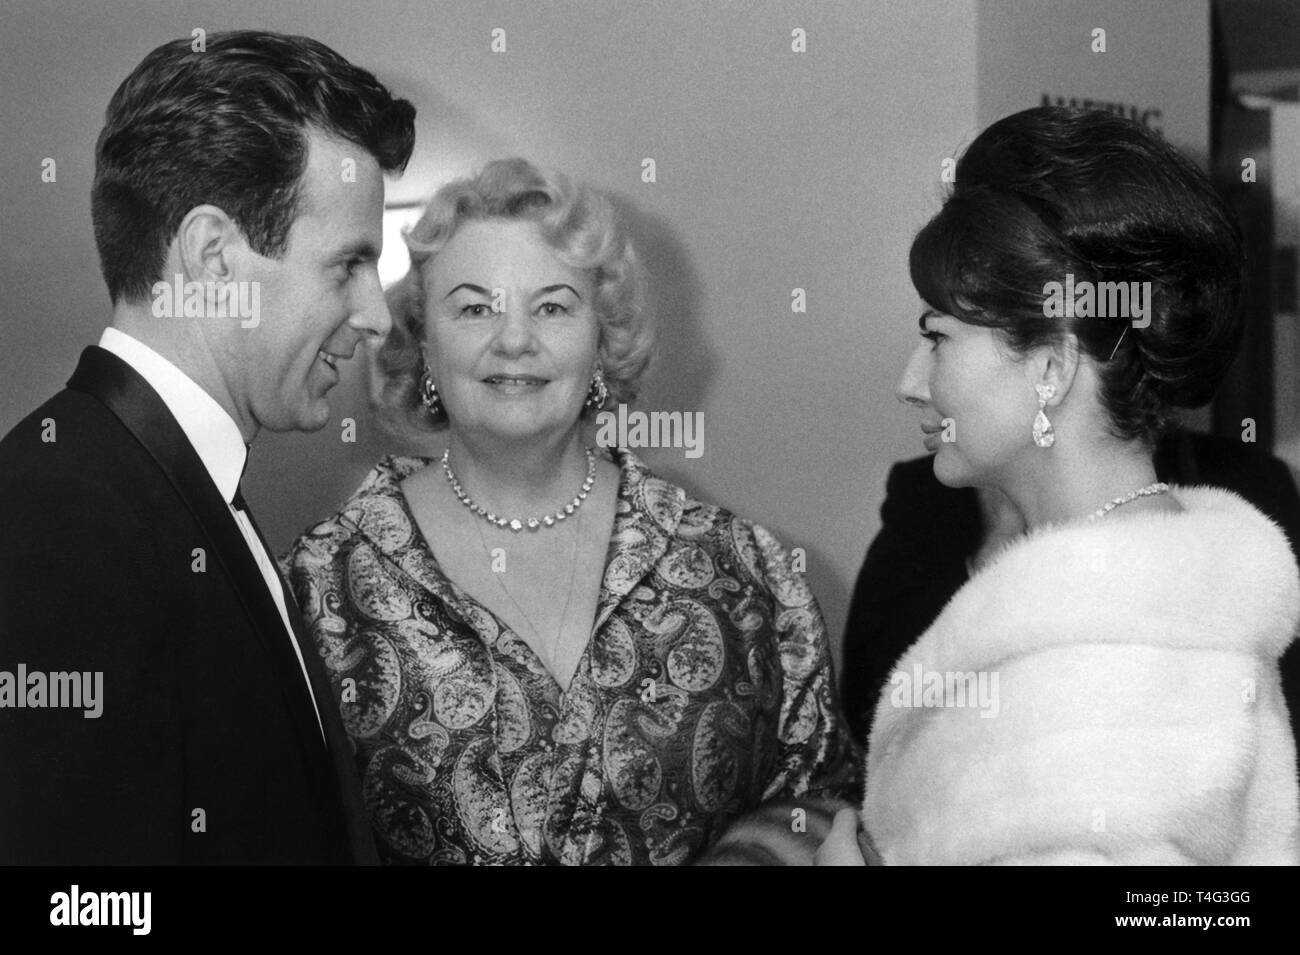 Swiss-Austrian actor Maximilian Schell (l) with his girlfriend Princess Soraya (r), ex-wife of the last Shah of Persia, and her mother Eva Esfandiary (c), photographed on 23 November 1963 during the festive opening of the Munich Opera. | usage worldwide Stock Photo